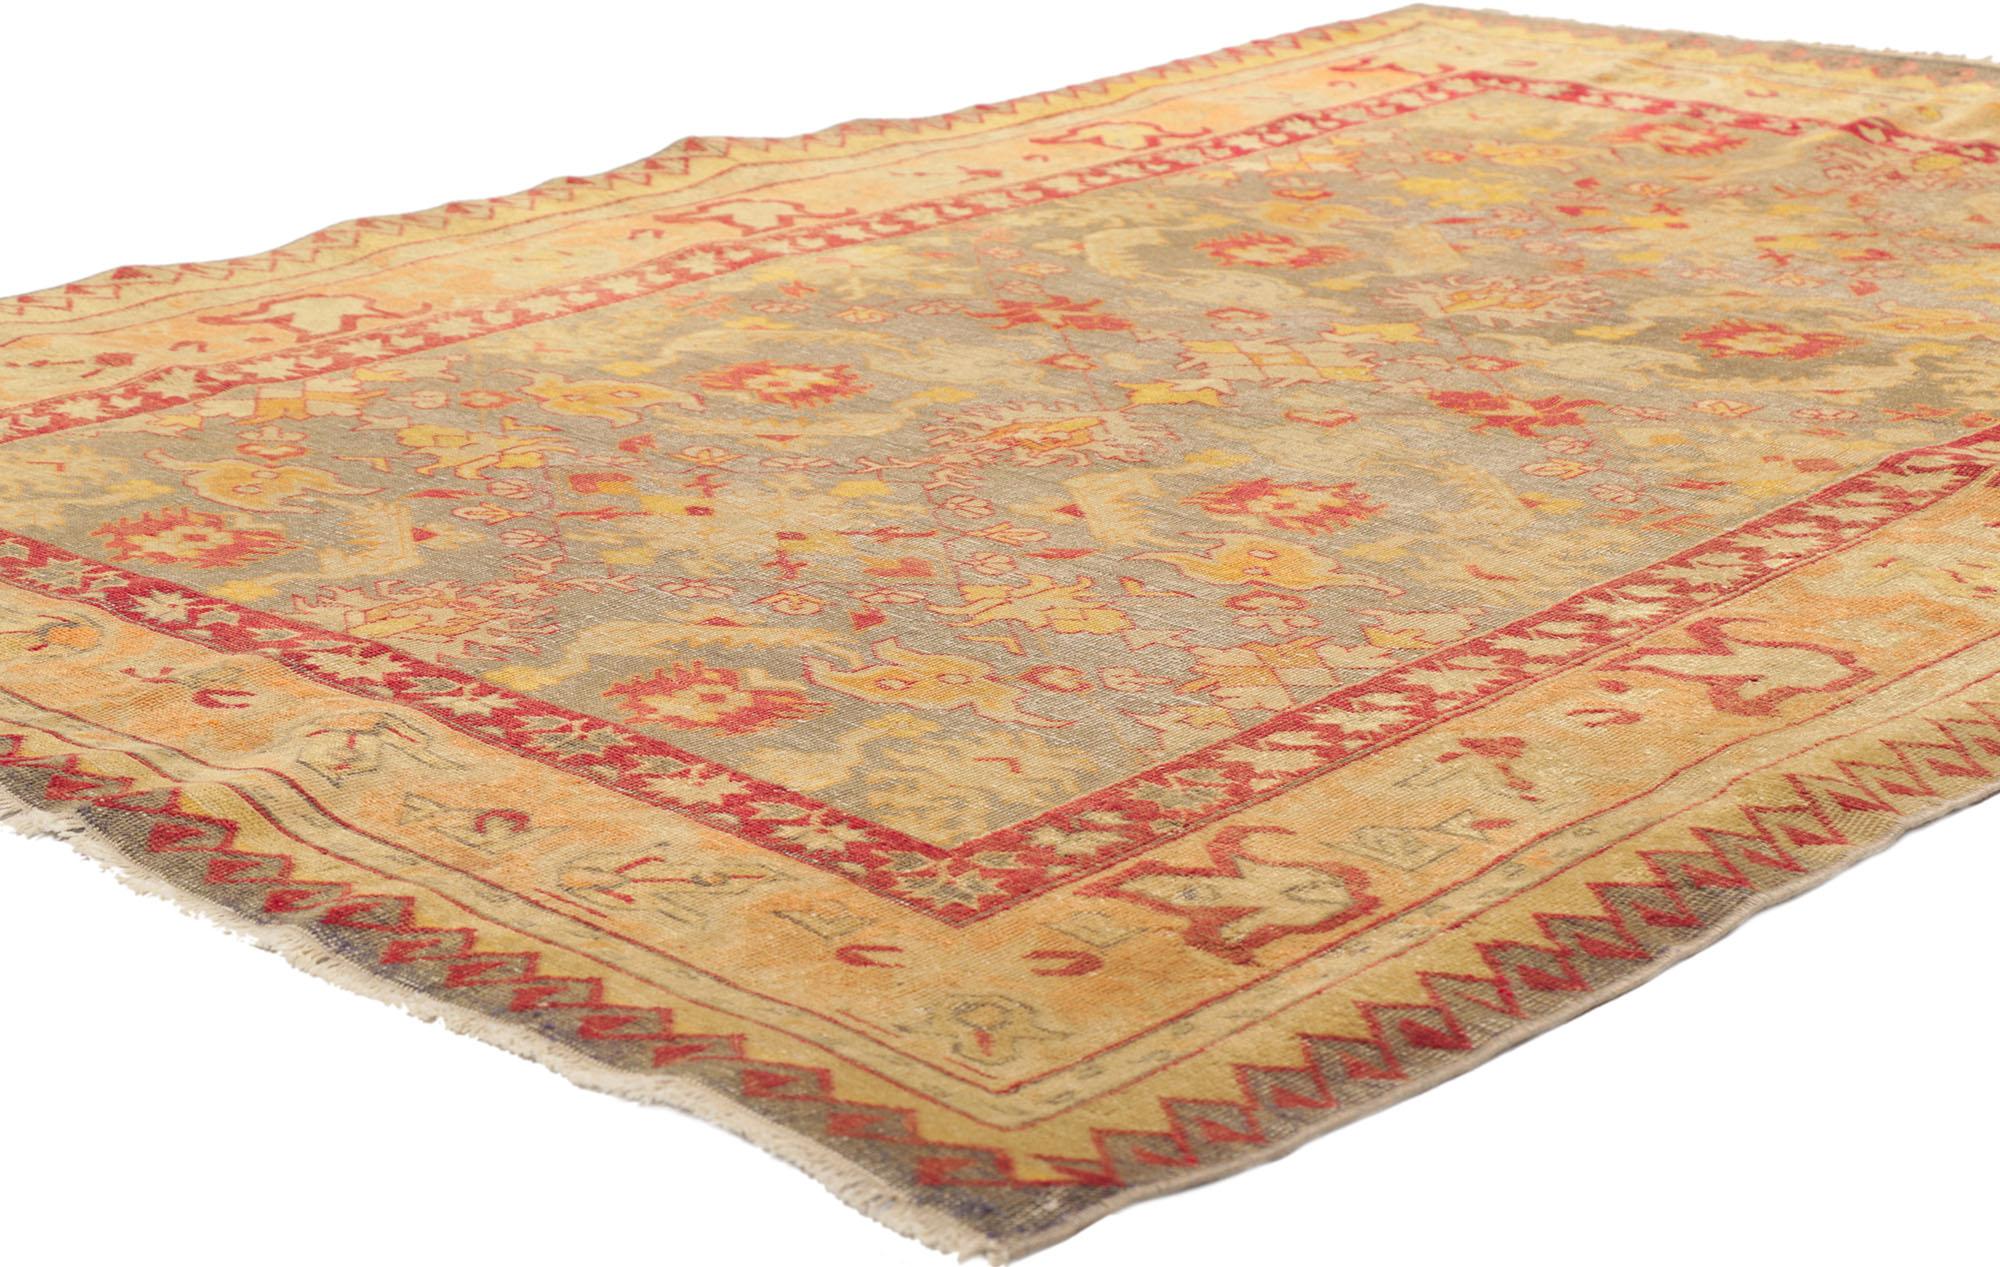 53722 Distressed Vintage Turkish Oushak Rug, 04'06 x 06'00.
Rustic sensibility meets weathered finesse in this hand knotted wool distressed vintage Turkish Oushak rug. The botanical design and bold color scheme woven into this piece work together